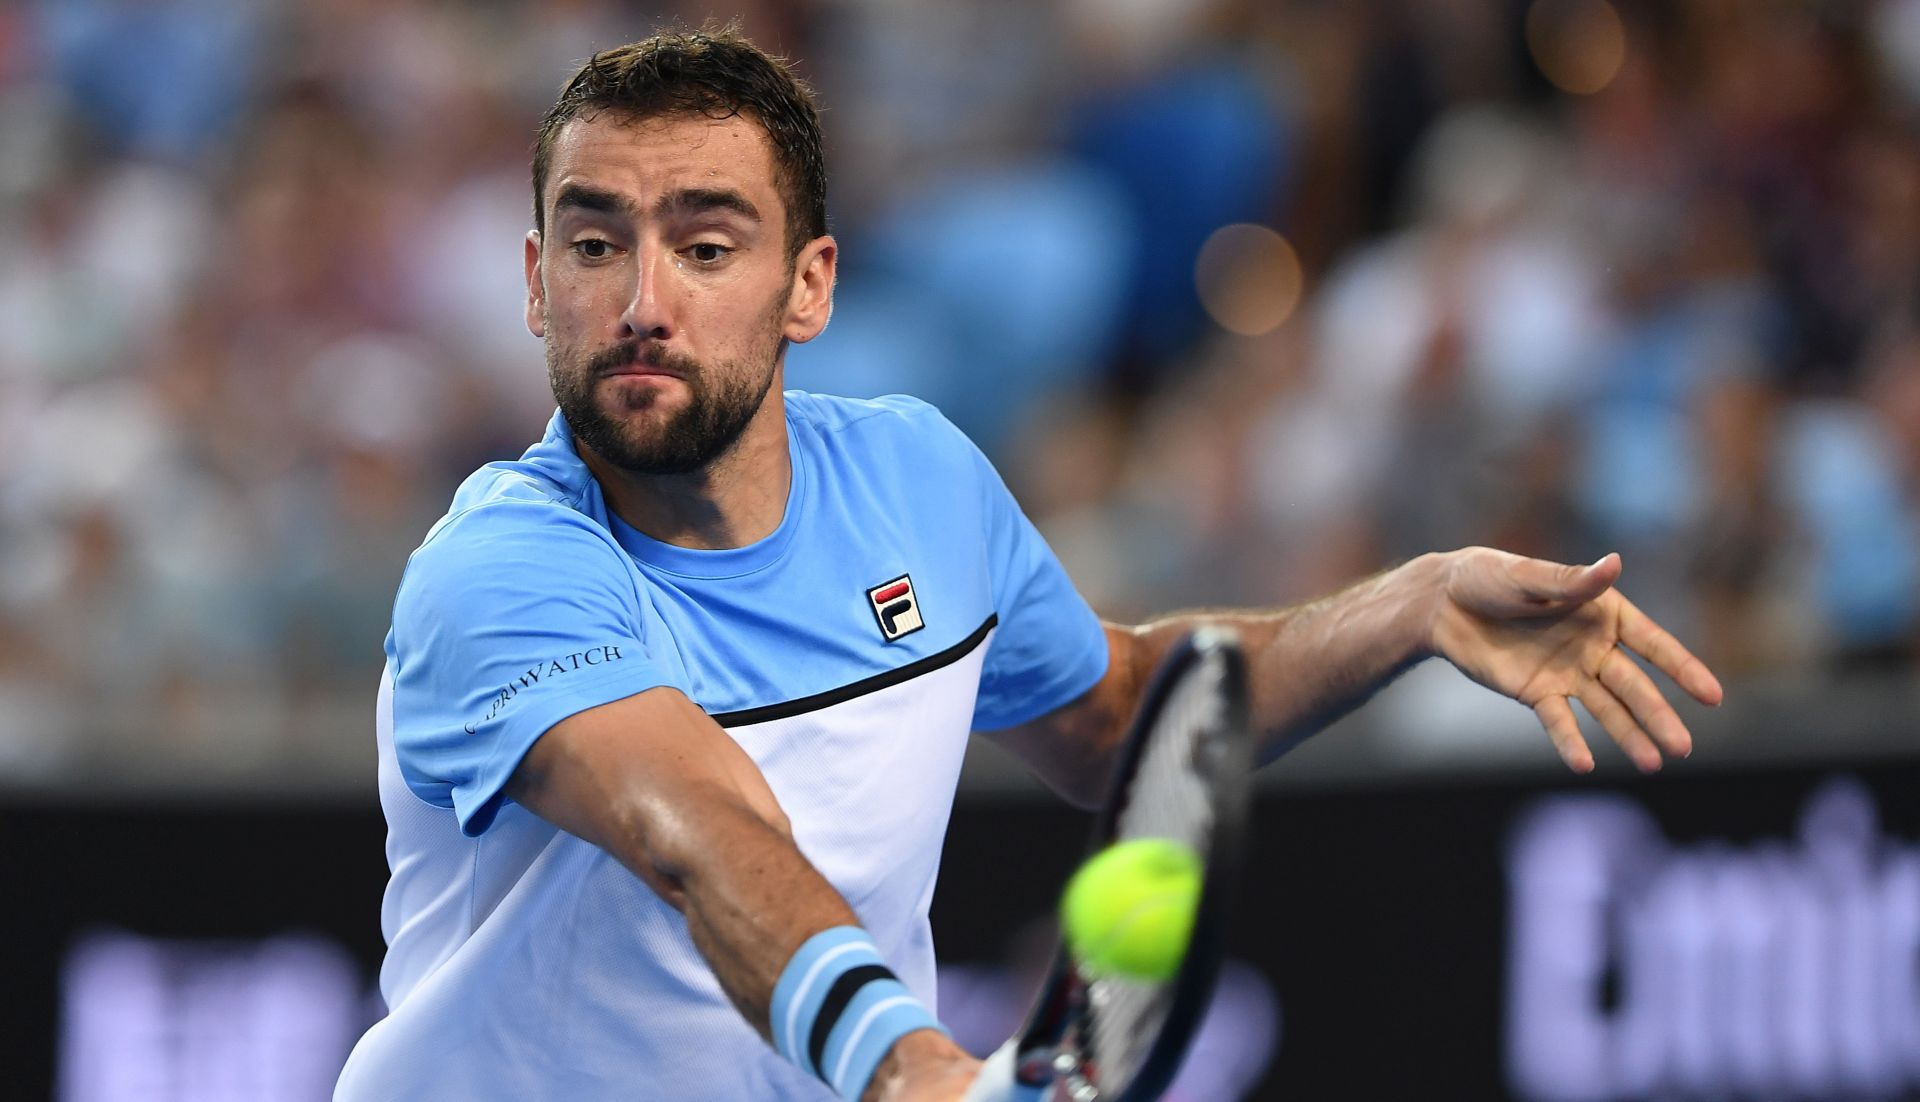 epa07282437 Marin Cilic of Croatia in action during his men's singles first round against Bernard Tomic of Australia at the Australian Open tennis tournament in Melbourne, Australia, 14 January 2019.  EPA/LUKAS COCH AUSTRALIA AND NEW ZEALAND OUT